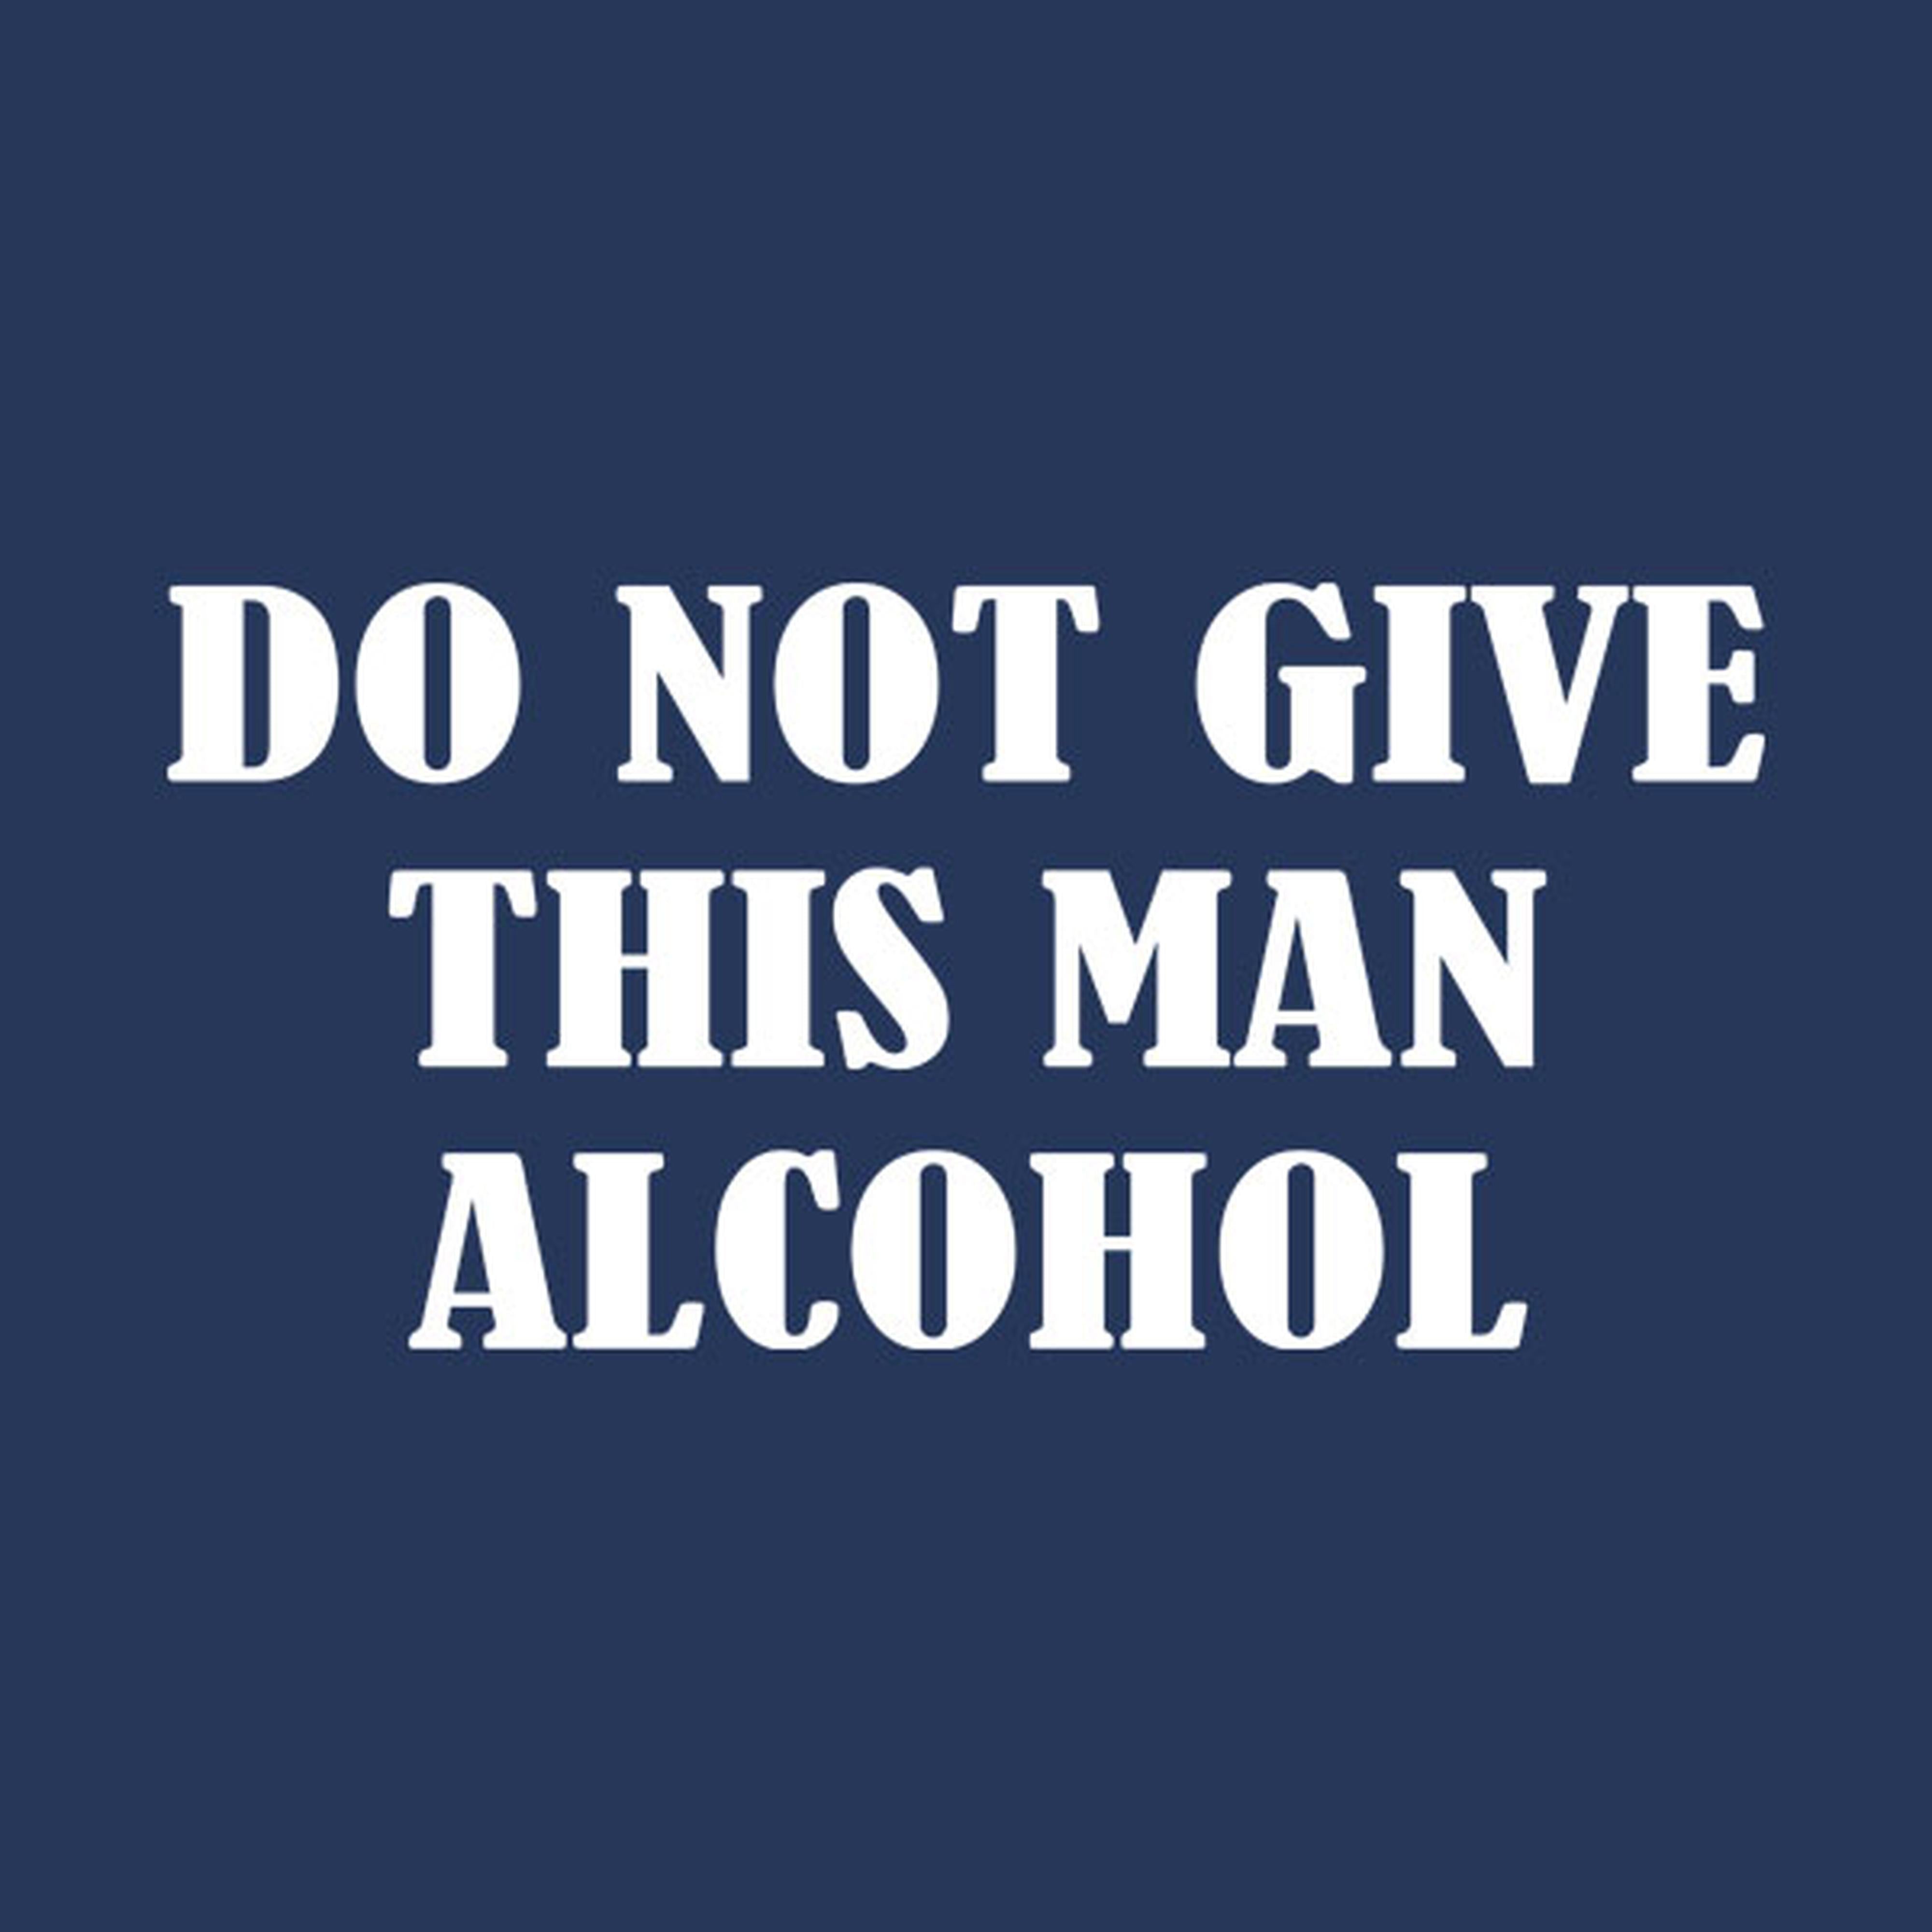 Do not give this man alcohol - T-shirt